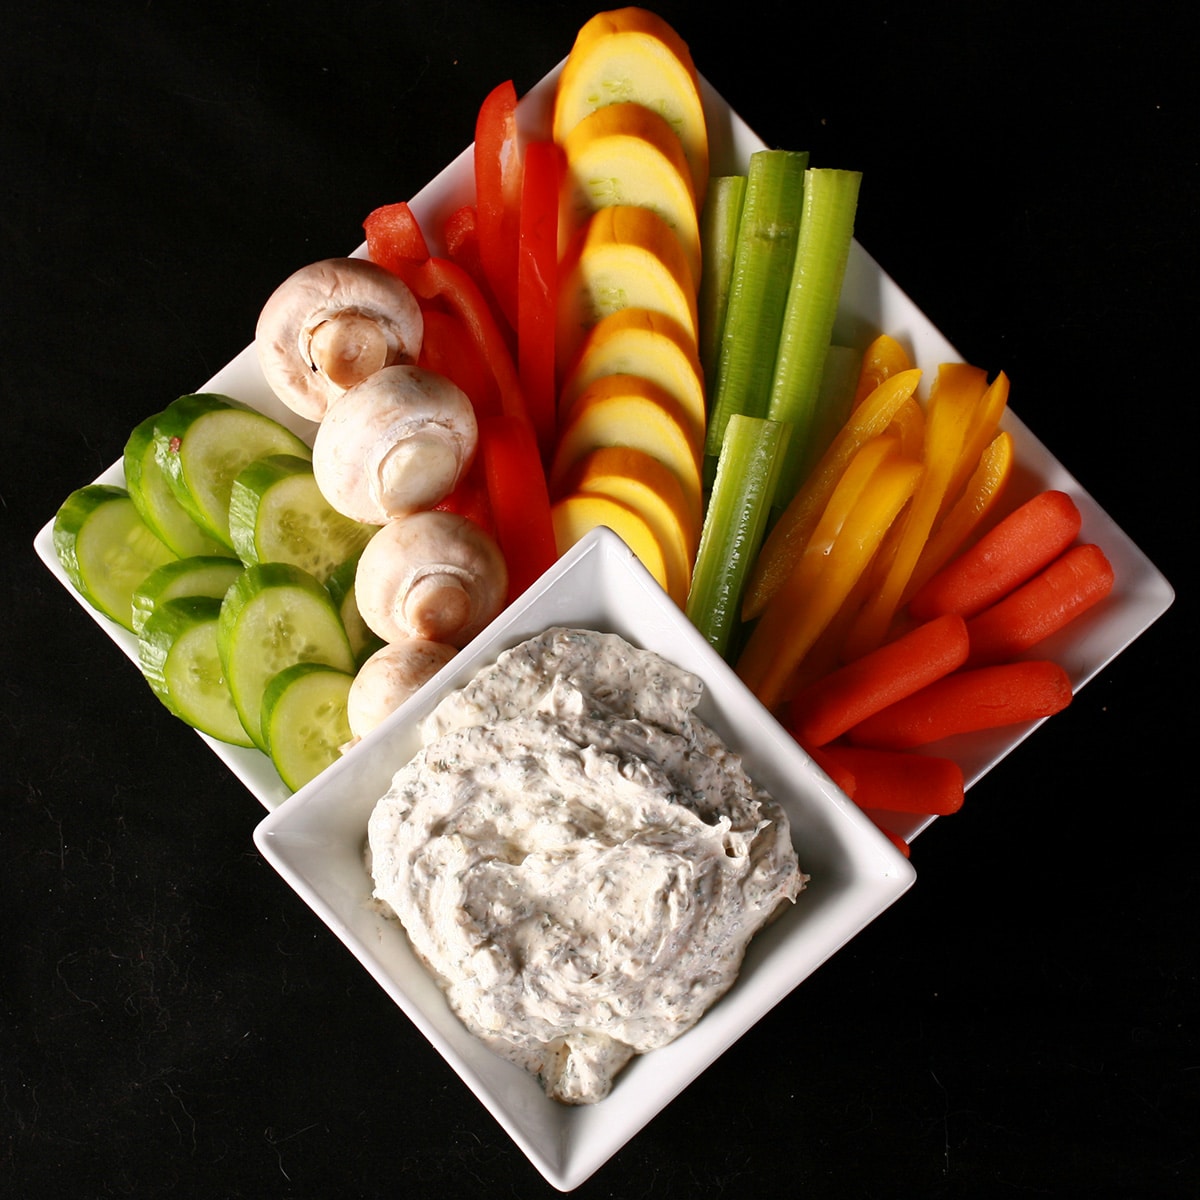 A large white square bowl of easy dill dip, on a larger plate surrounded by a variety of brightly coloured vegetable spears and slices.